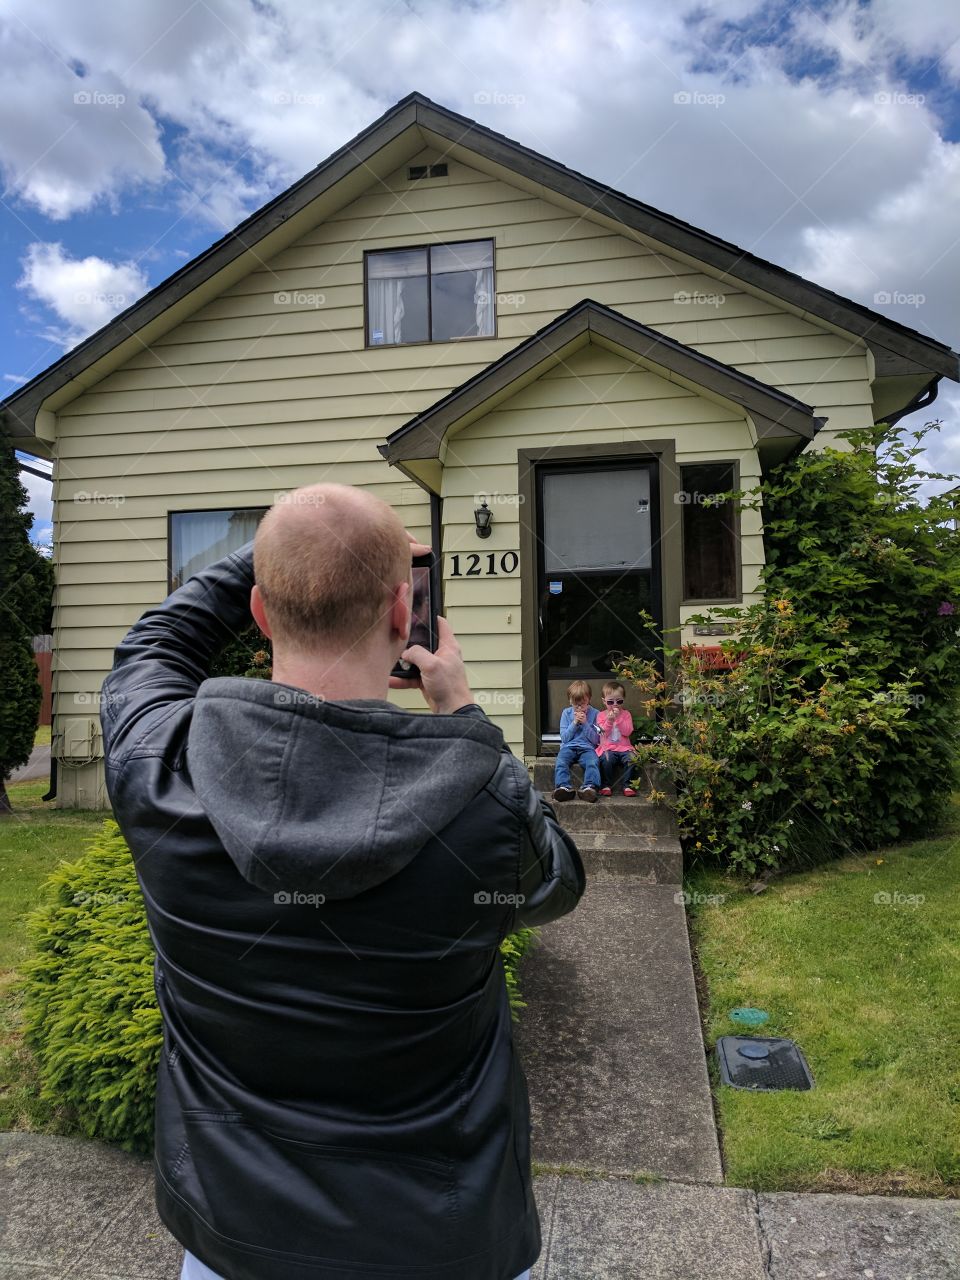 Matt took the kids picture while I took his. The house is Kurt Cobain"s childhood home. Matt wanted to visit so we had to take some pics.